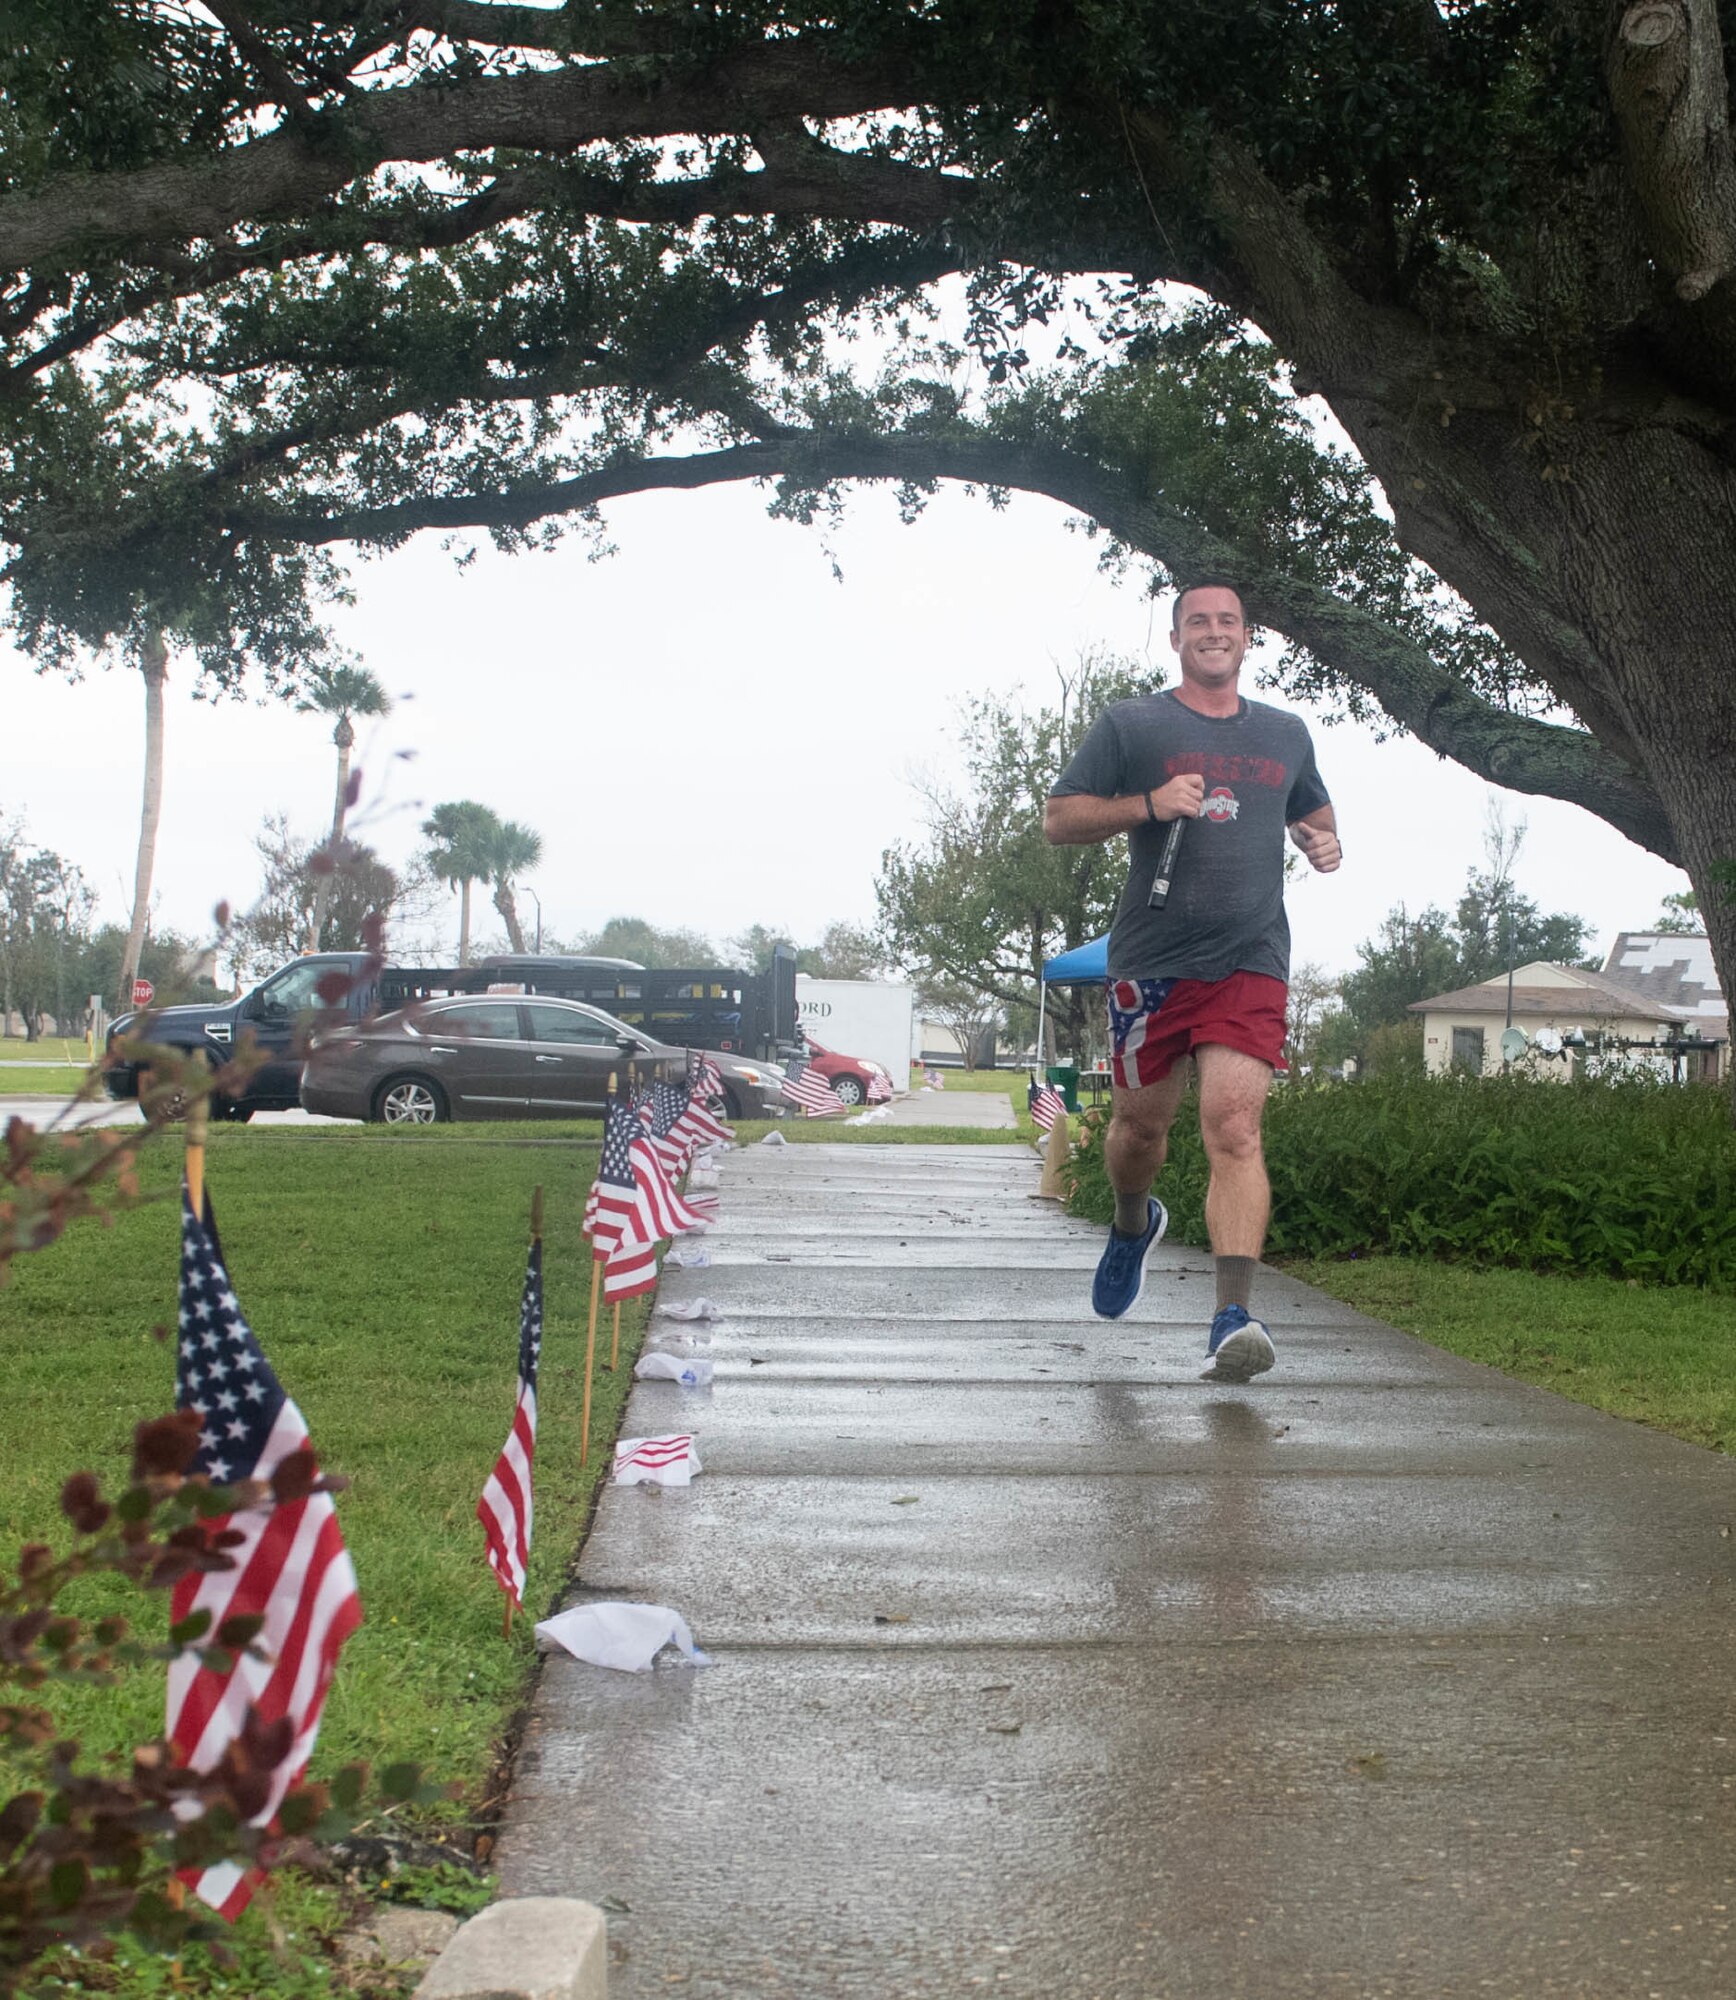 A volunteer runner participates in a 24-hour vigil run at Tyndall Air Force Base, Sept. 24, 2020. The event was held to honor POW/MIA for the 32nd consecutive year at Tyndall. (U.S. Air Force photo by Airman Anabel Del Valle)